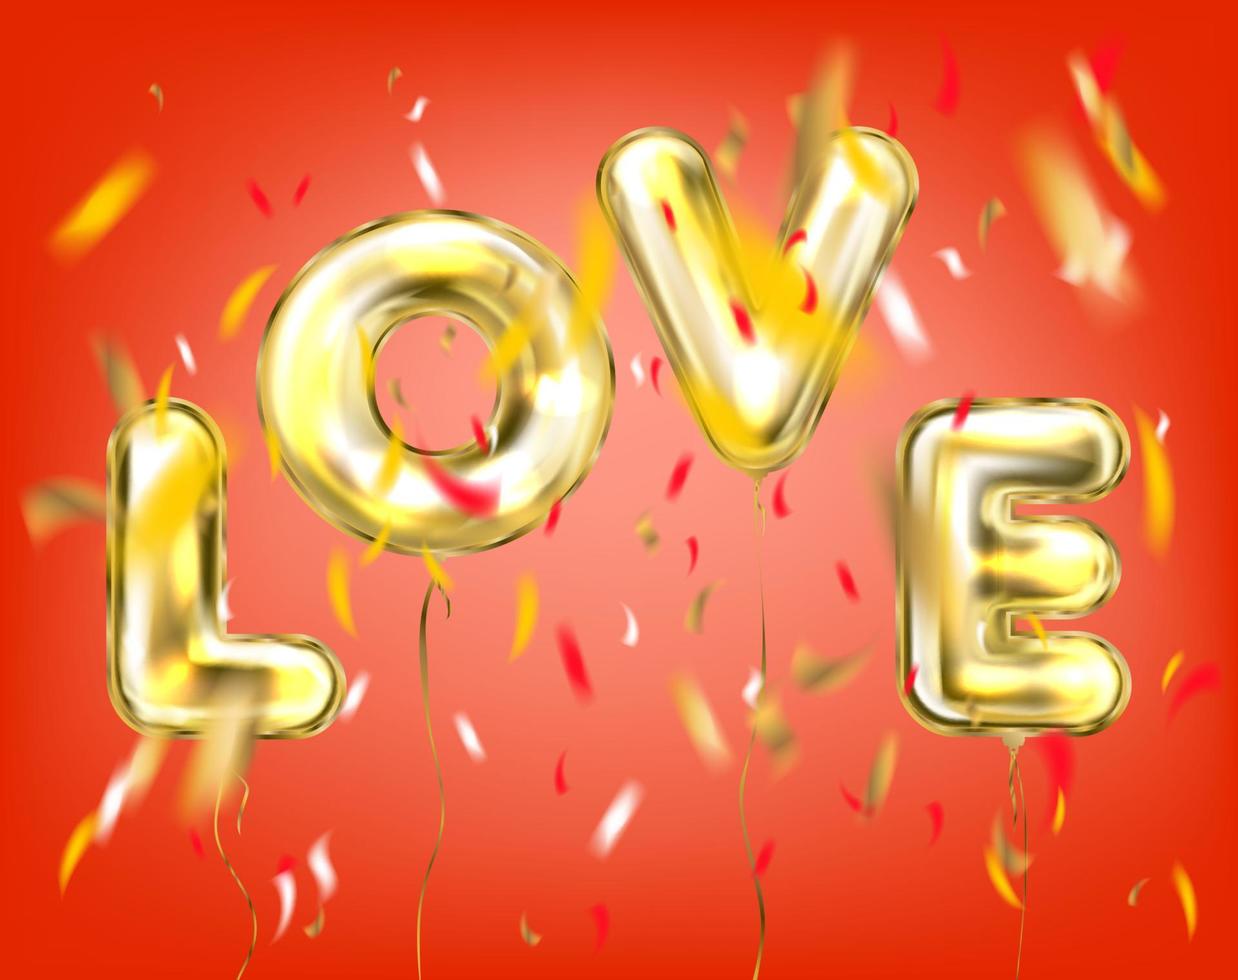 Love lettering by foil golden balloons in red vector